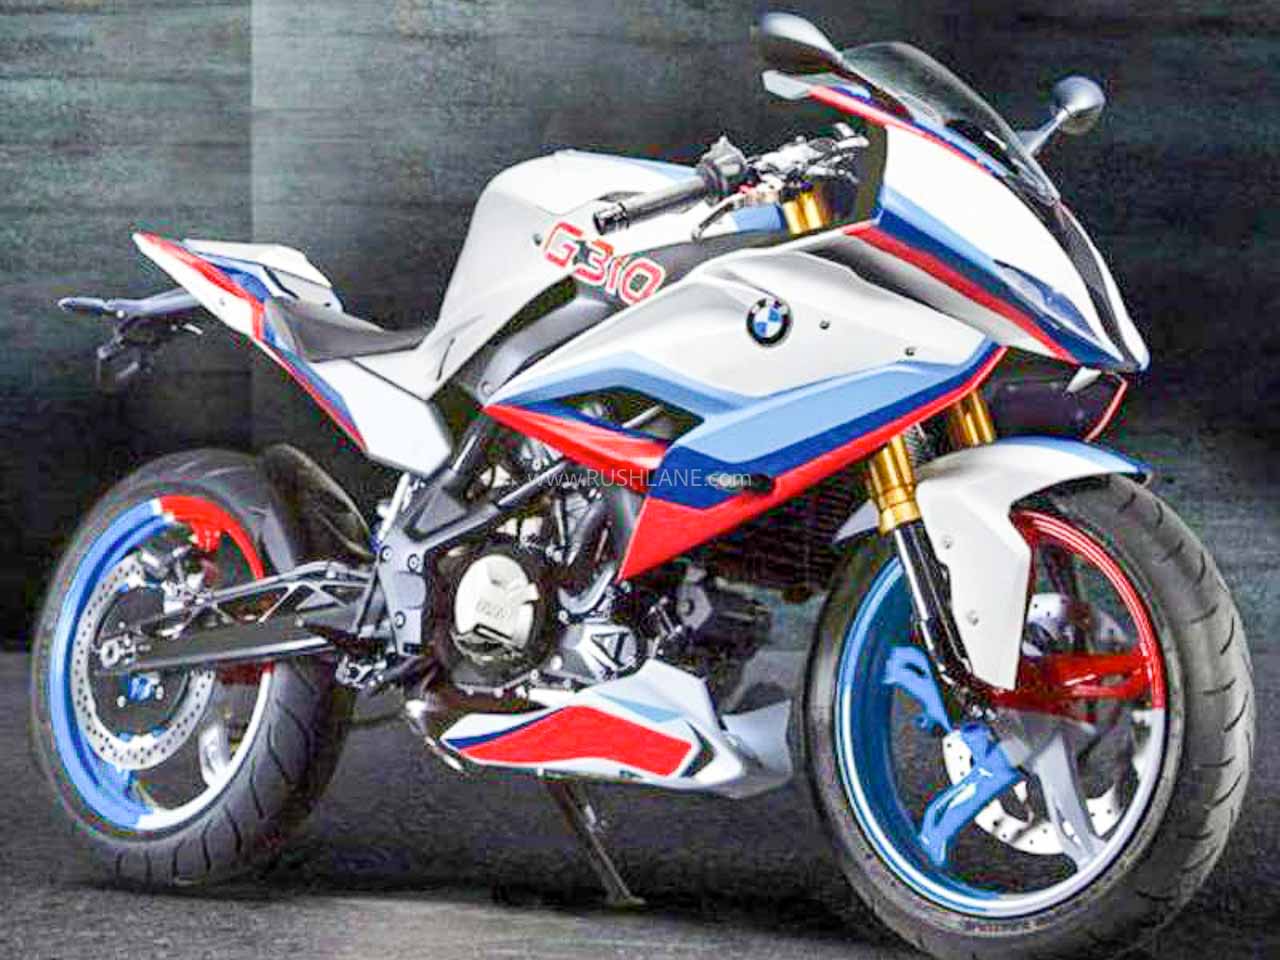 New BMW 310 RR Fully Faired Motorcycle Based On Apache 310 – 15th July Launch